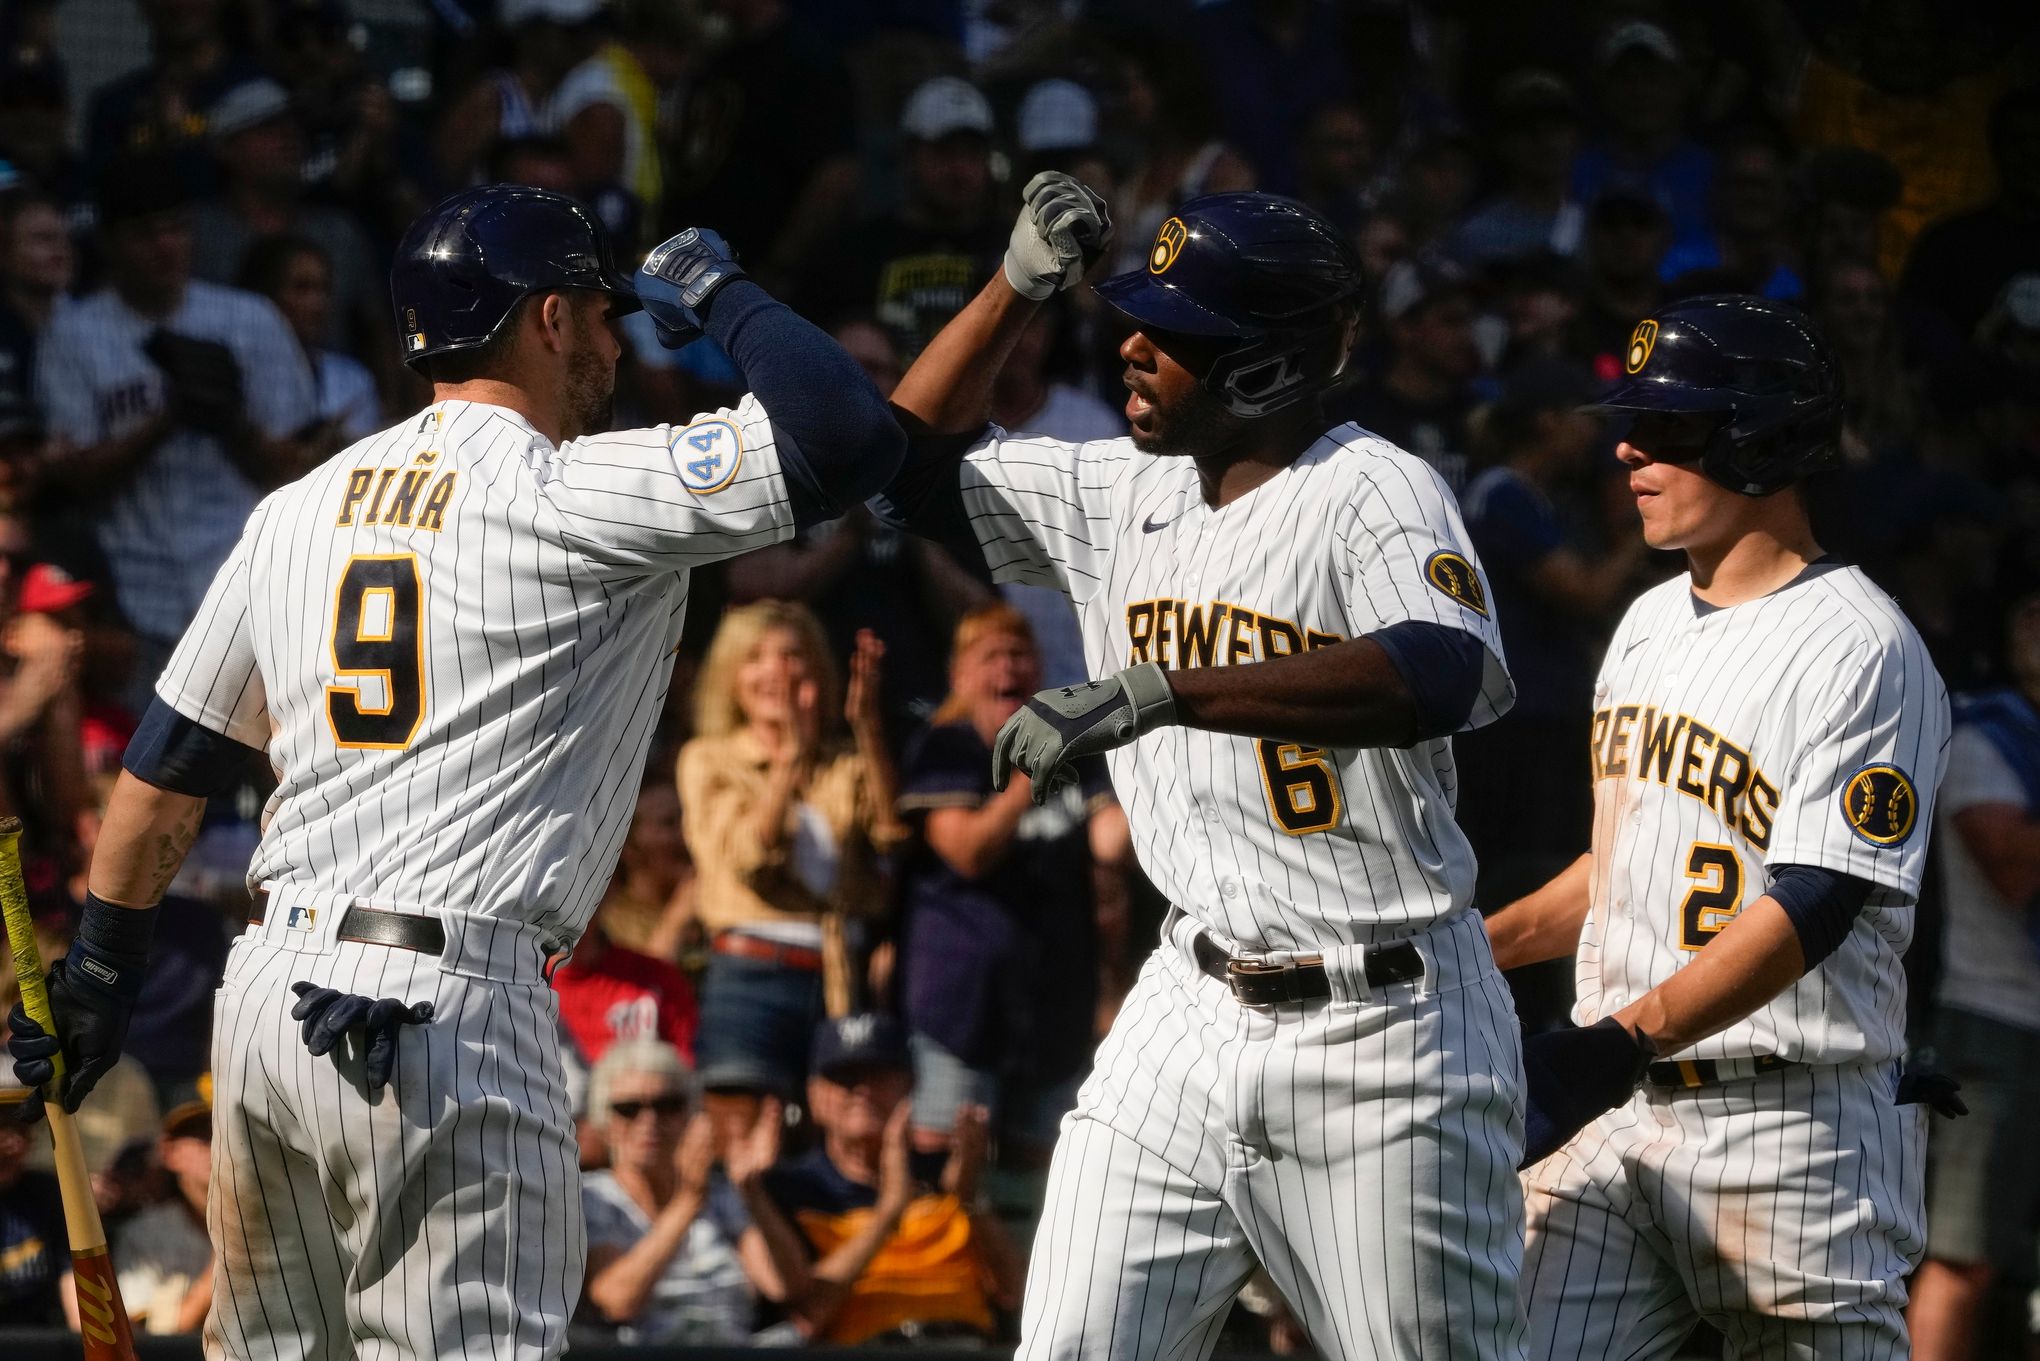 WALK-OFF GRAND SLAM! Daniel Vogelbach wins it for the Brewers with